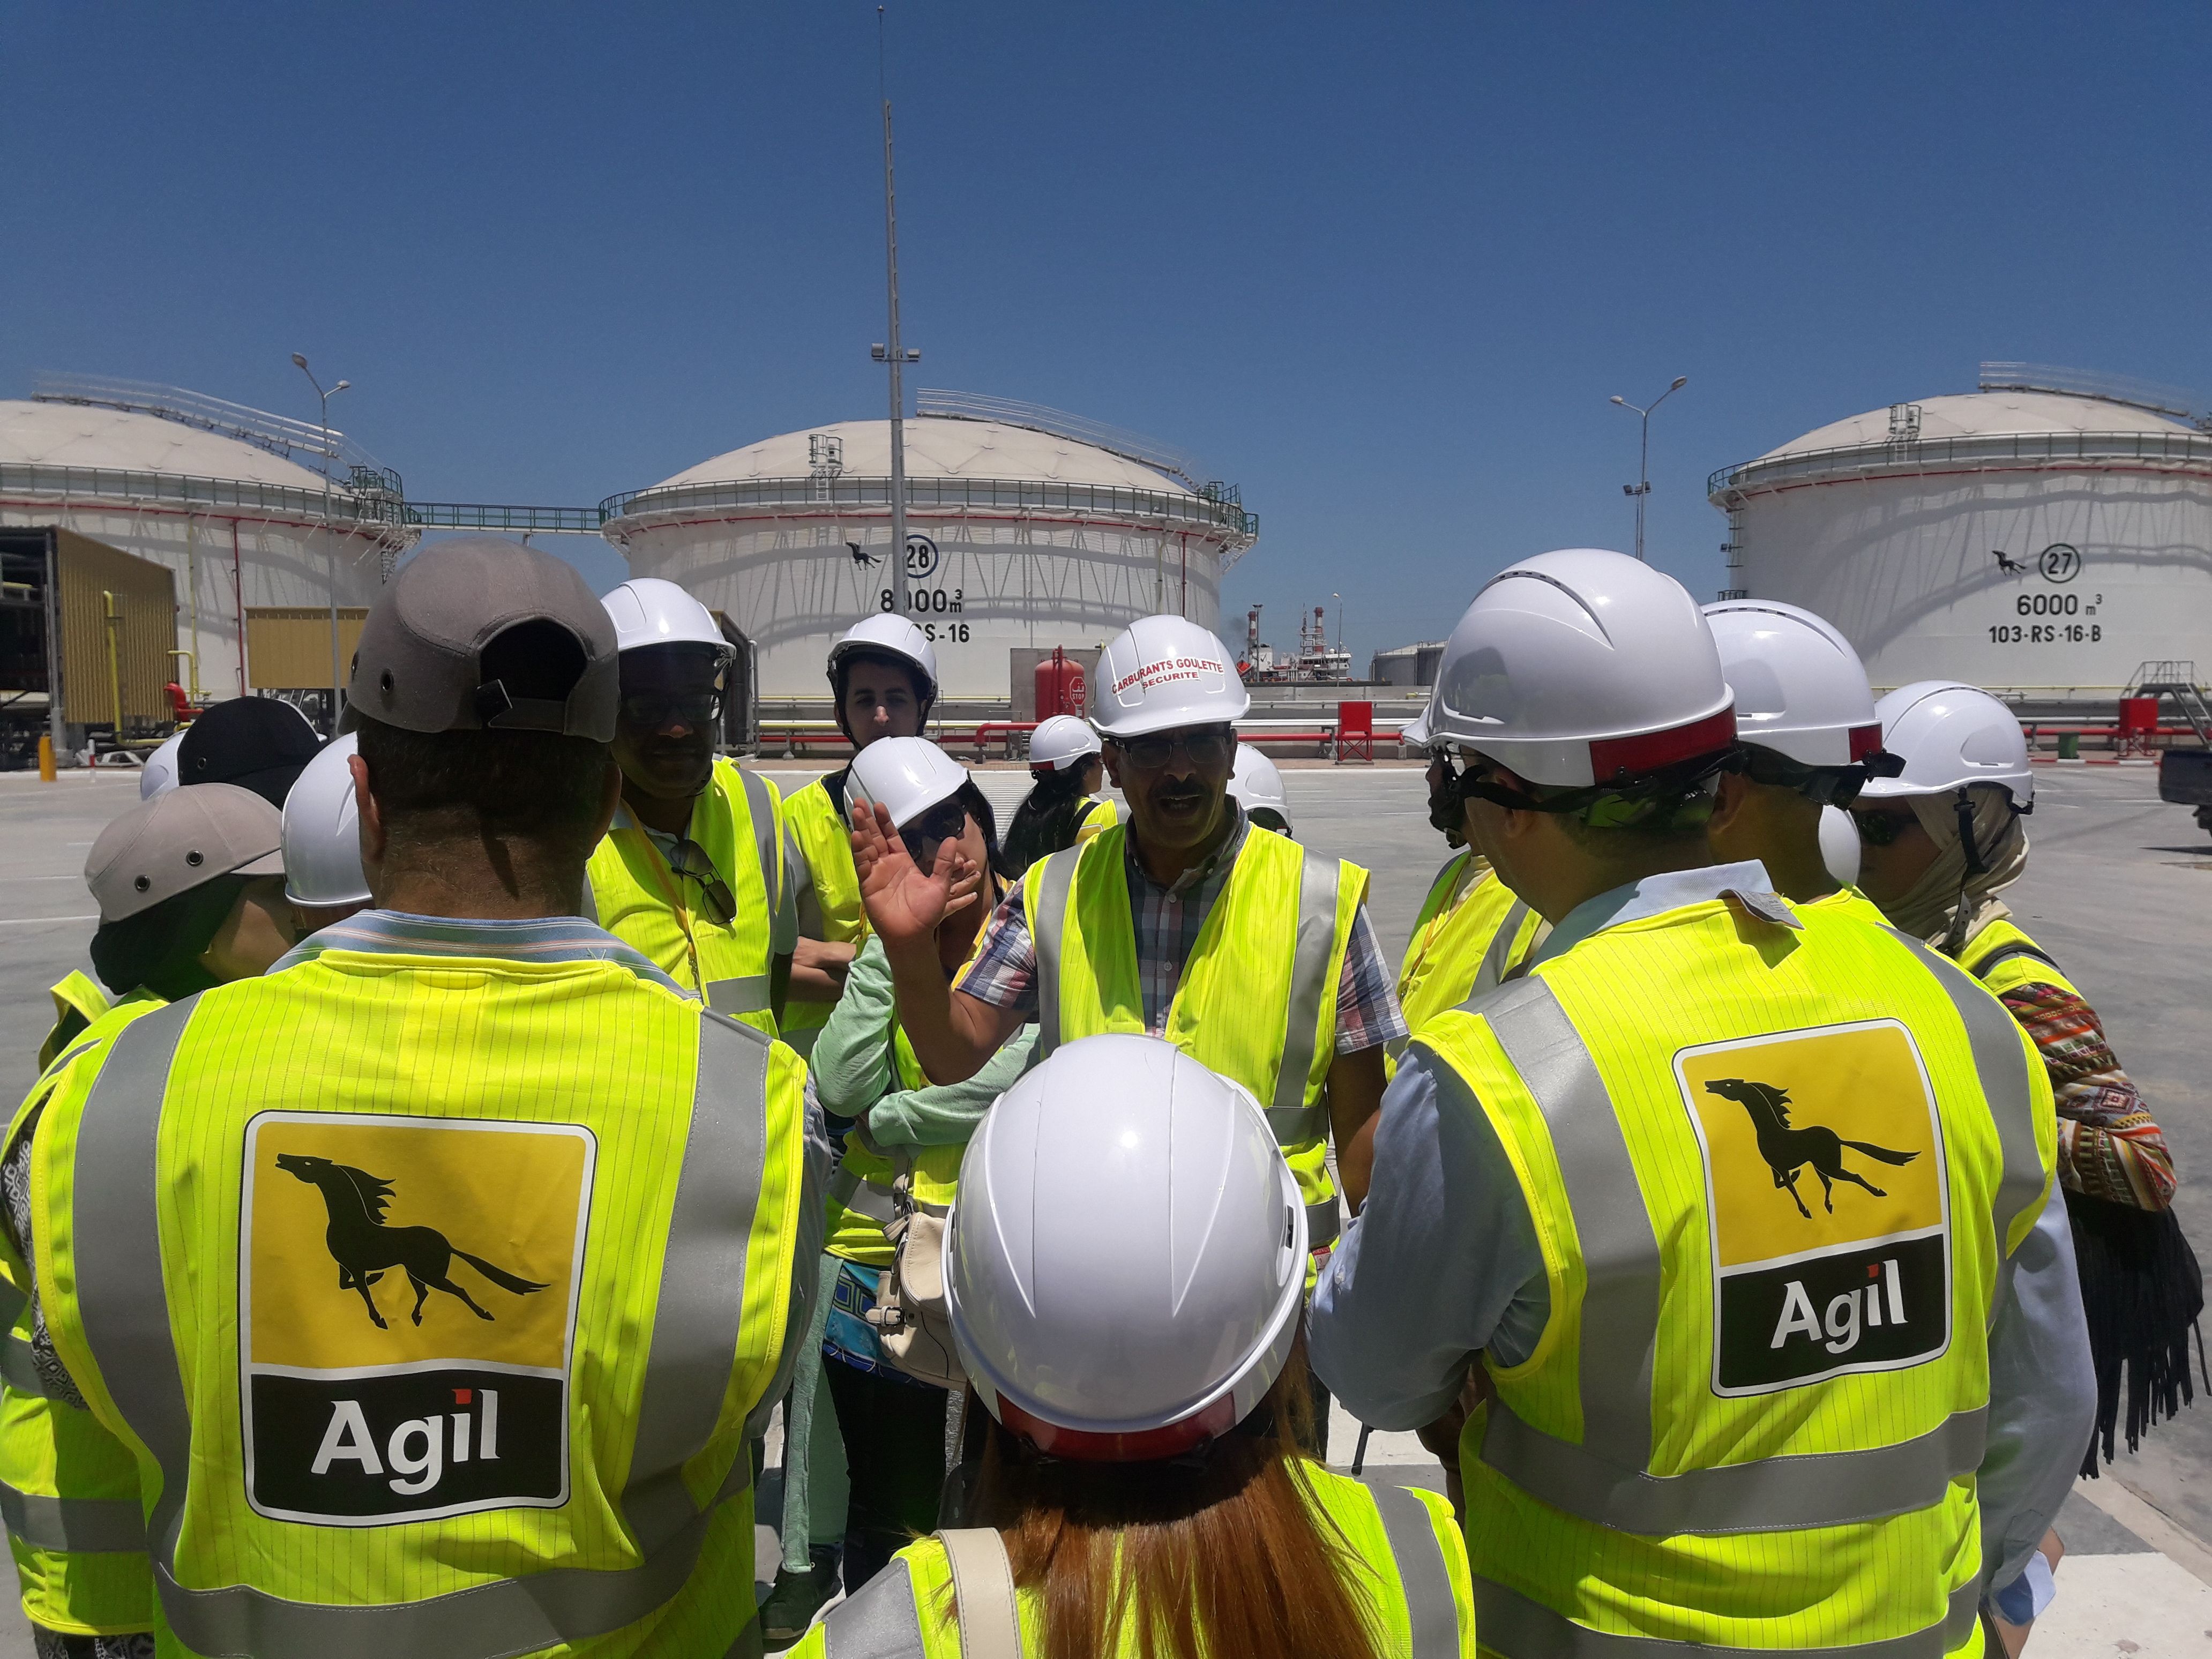 Participants of the training at the AGIL storage center in Radès 